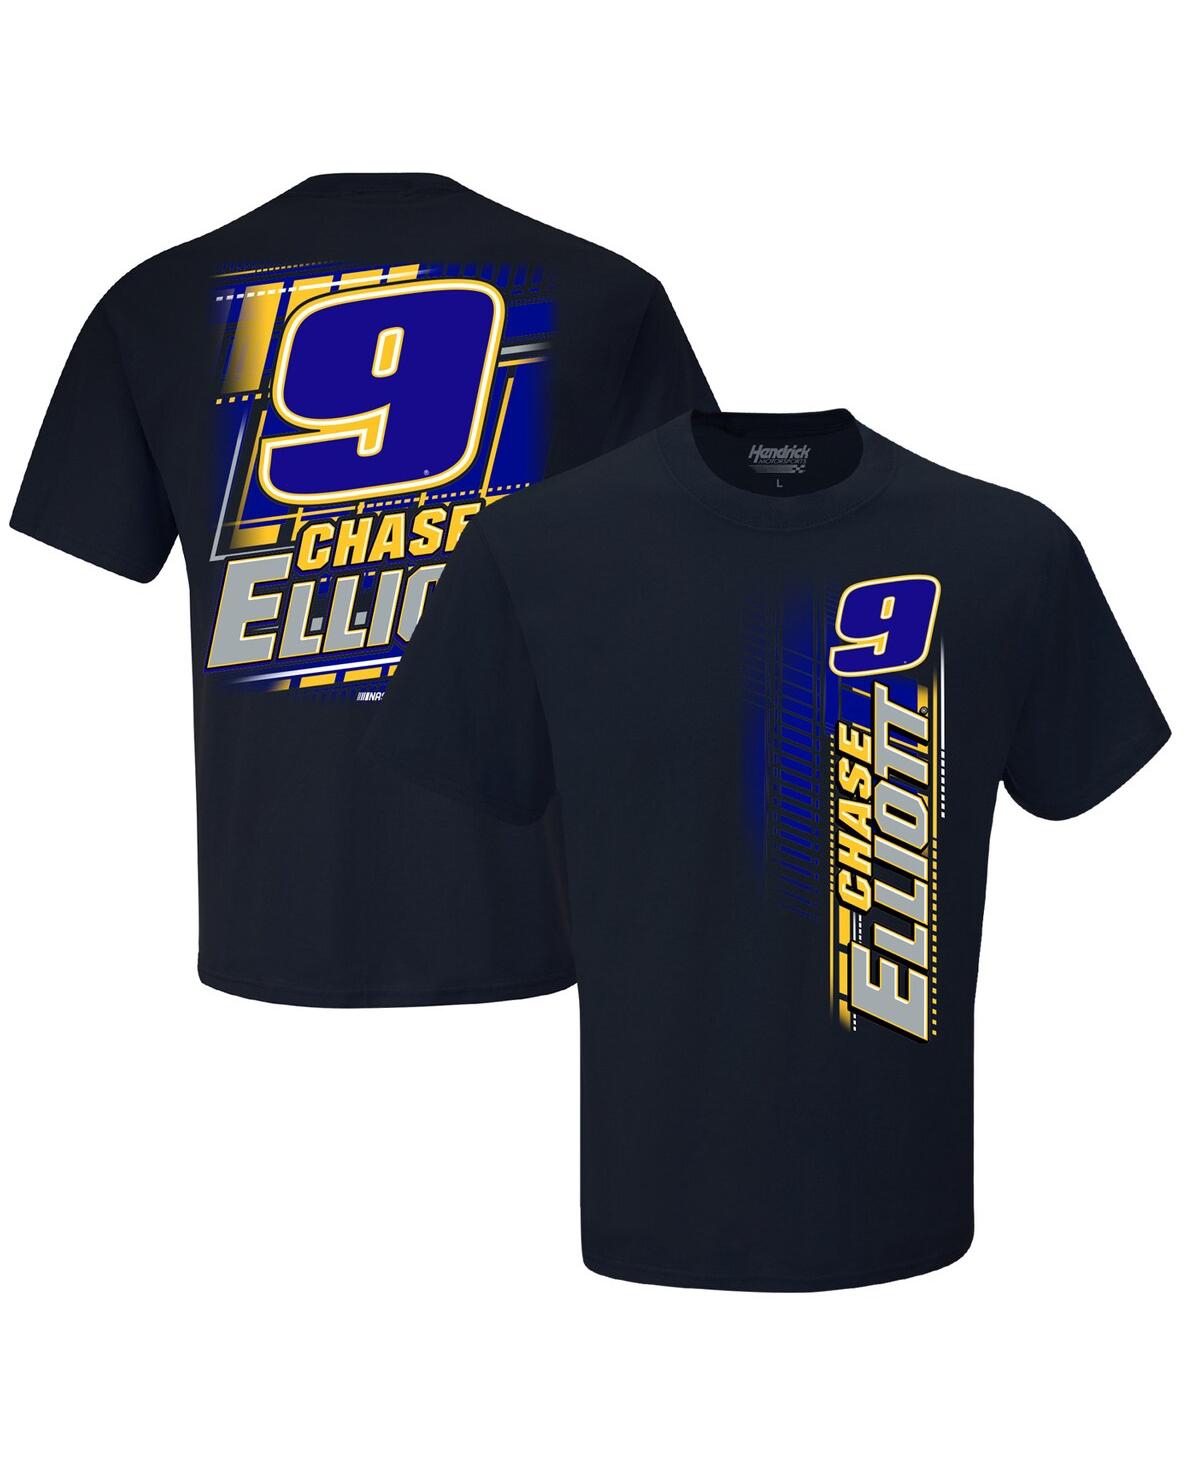 HENDRICK MOTORSPORTS TEAM COLLECTION MEN'S HENDRICK MOTORSPORTS TEAM COLLECTION NAVY CHASE ELLIOTT NAME AND NUMBER T-SHIRT